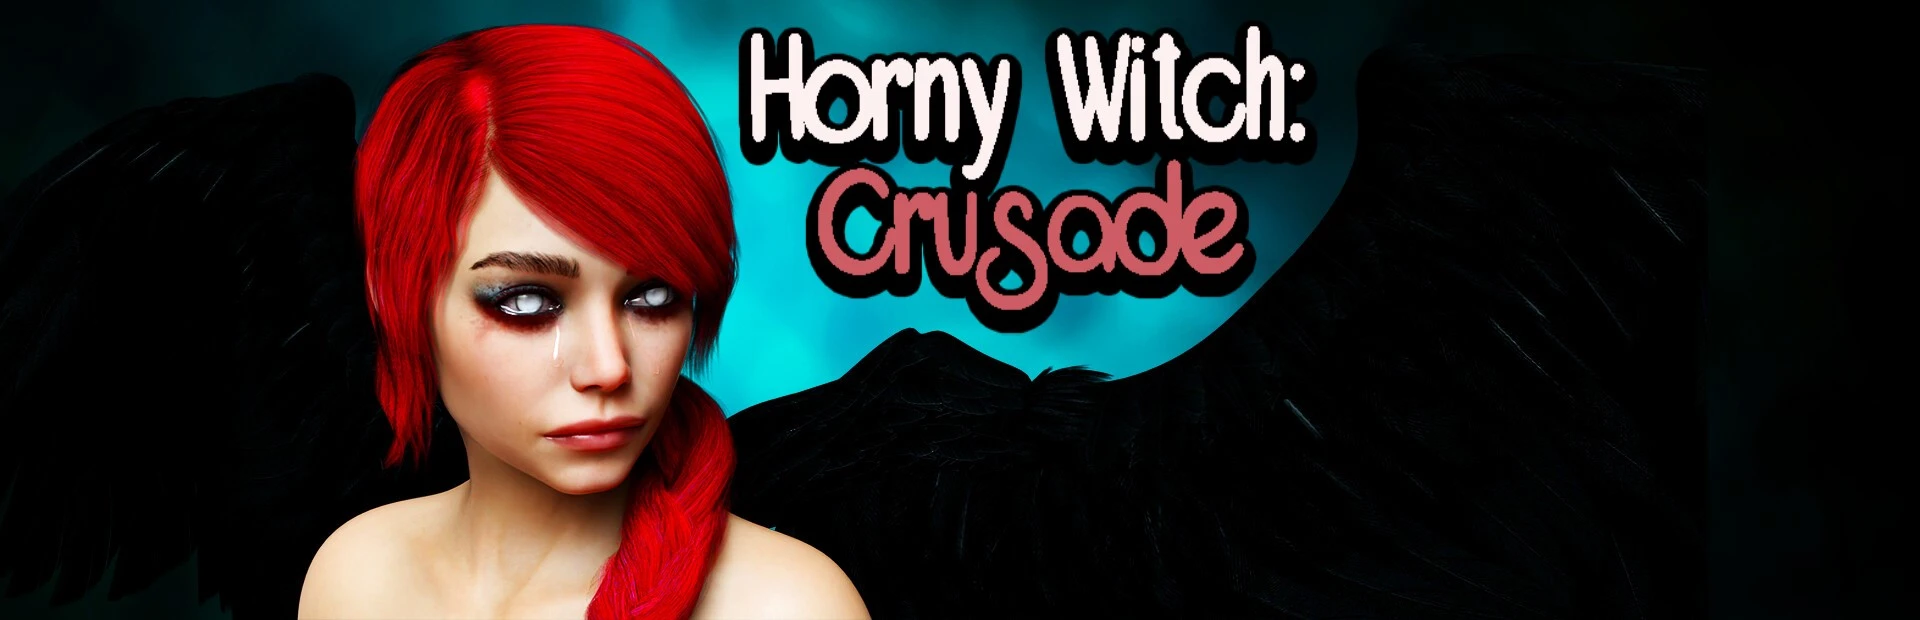 Horny Witch: Crusade main image